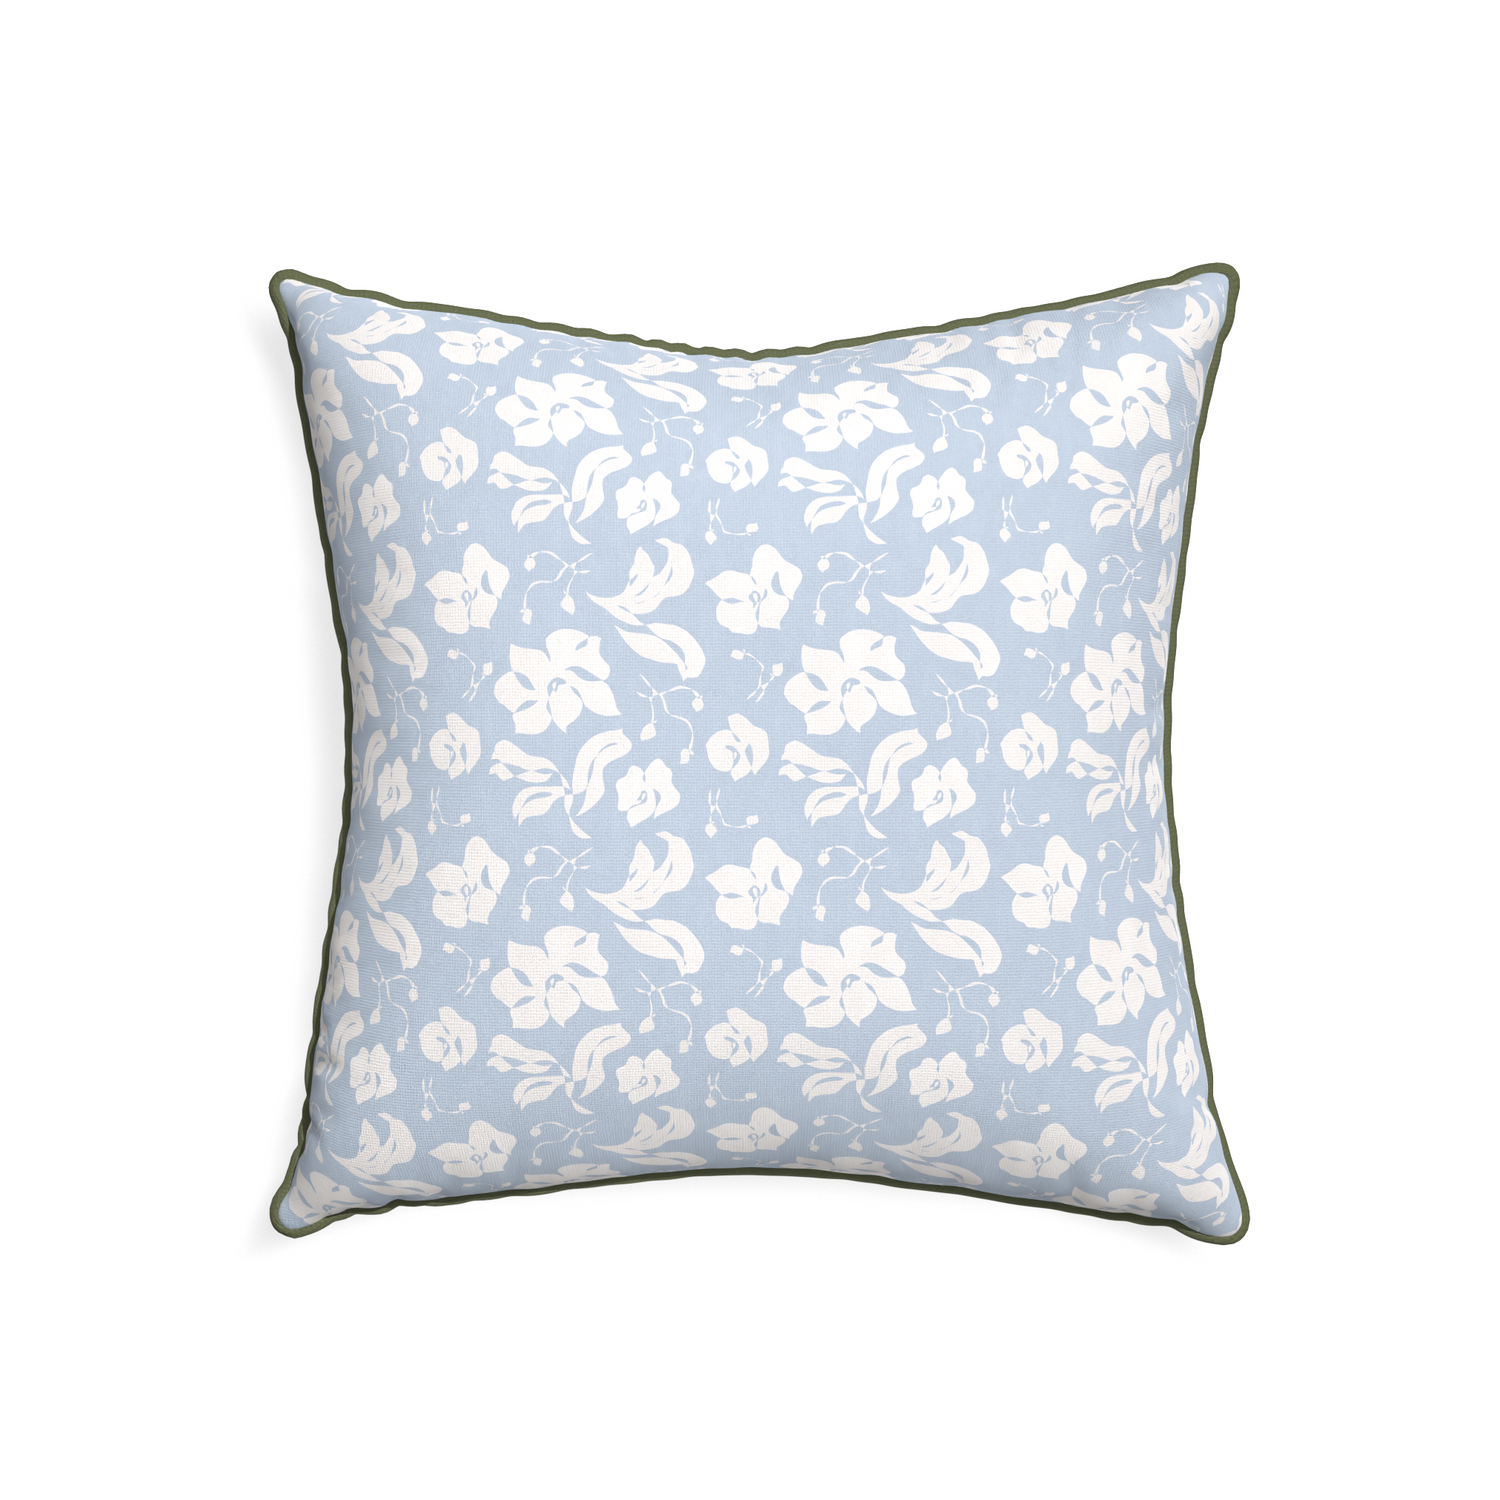 22-square georgia custom cornflower blue floralpillow with f piping on white background